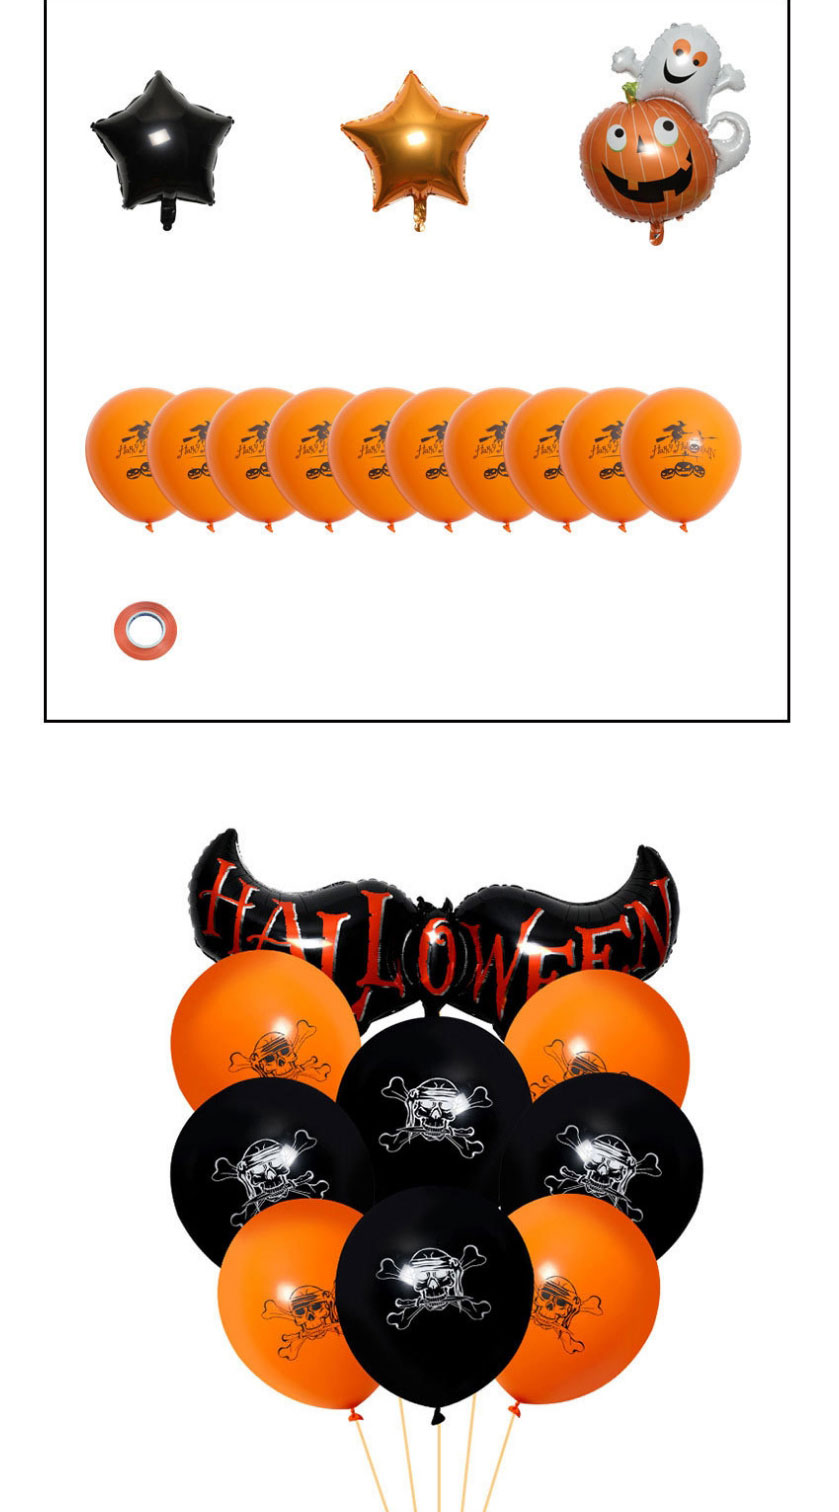 Fashion Balloon Combination 3 Halloween Printing Thickened Balloon Set,Festival & Party Supplies